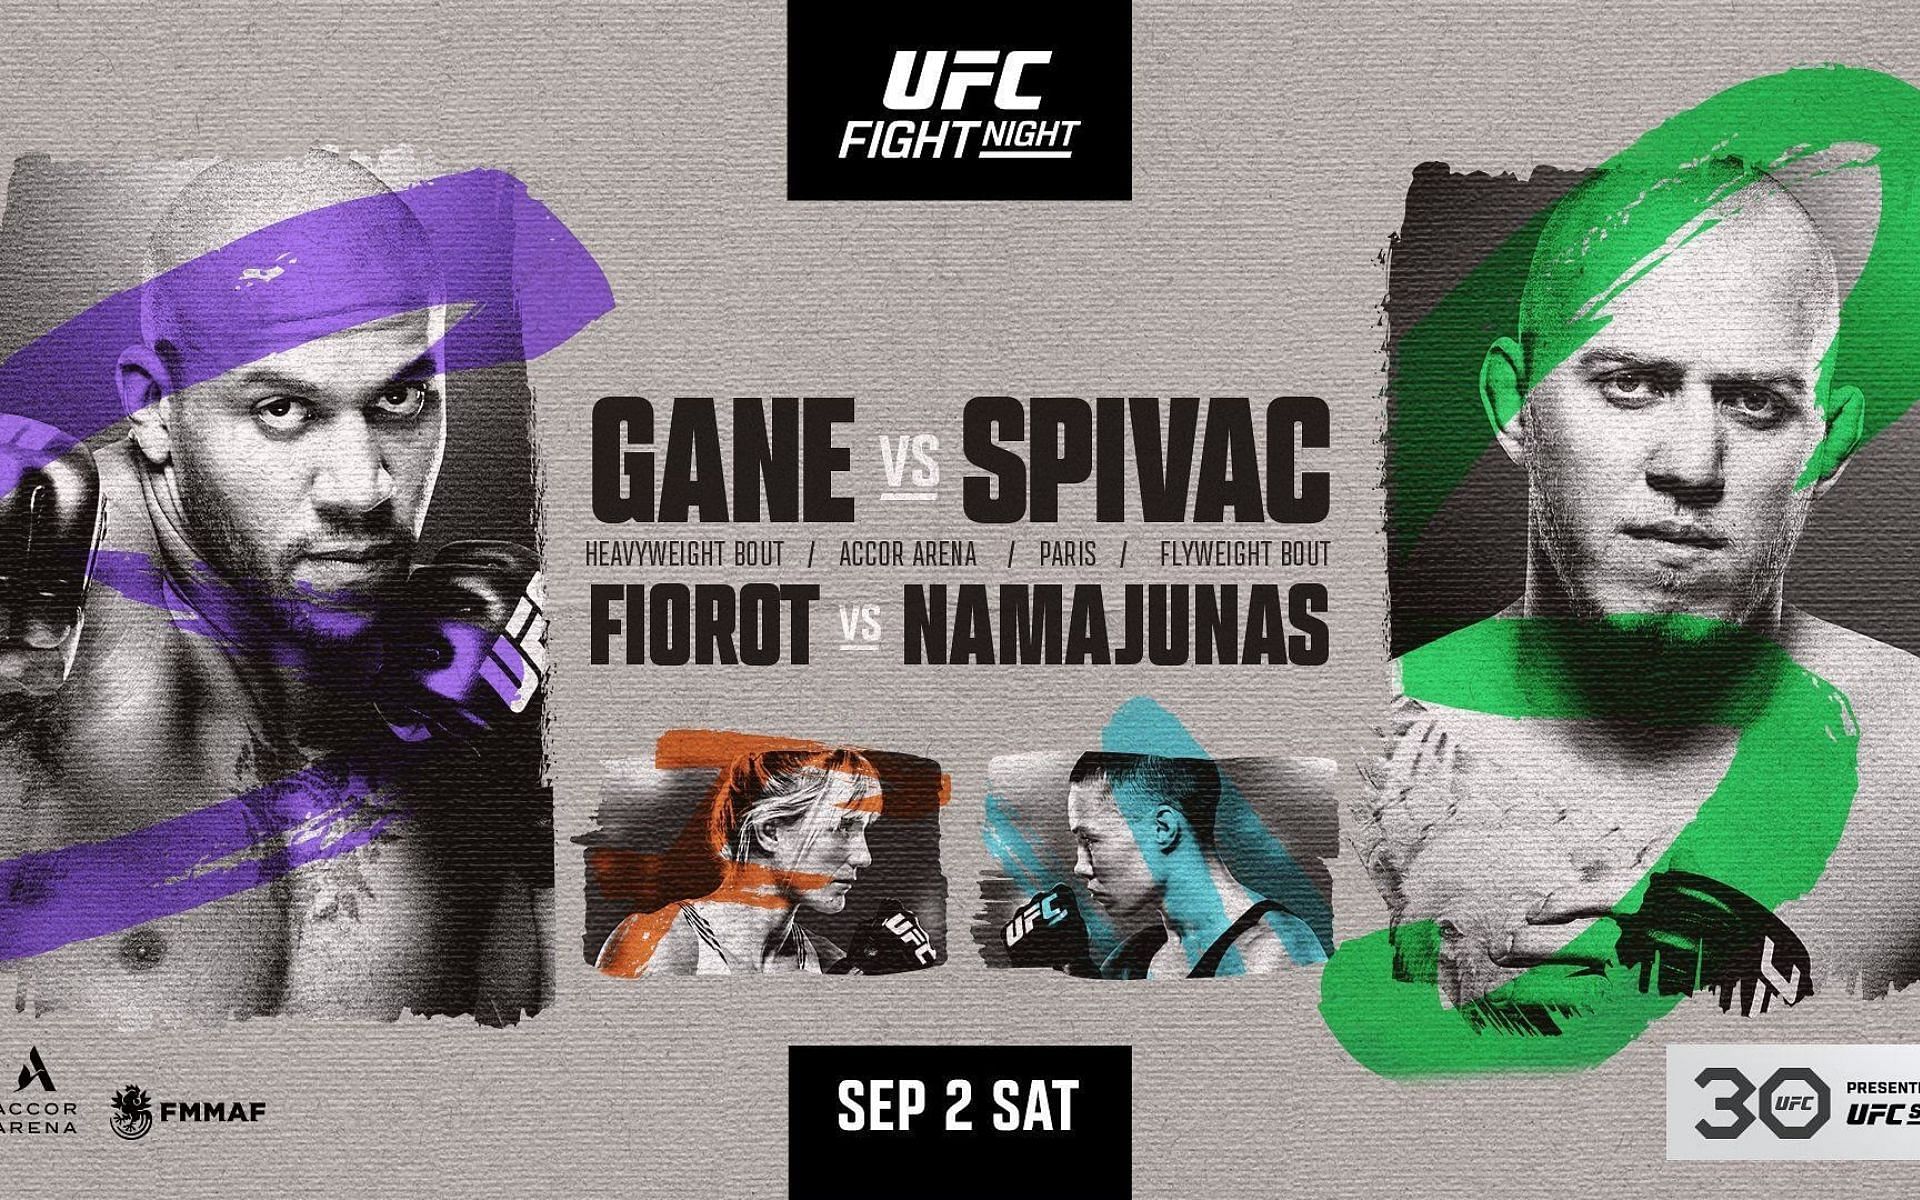 The UFC returns to Paris this weekend for a major Fight Night event